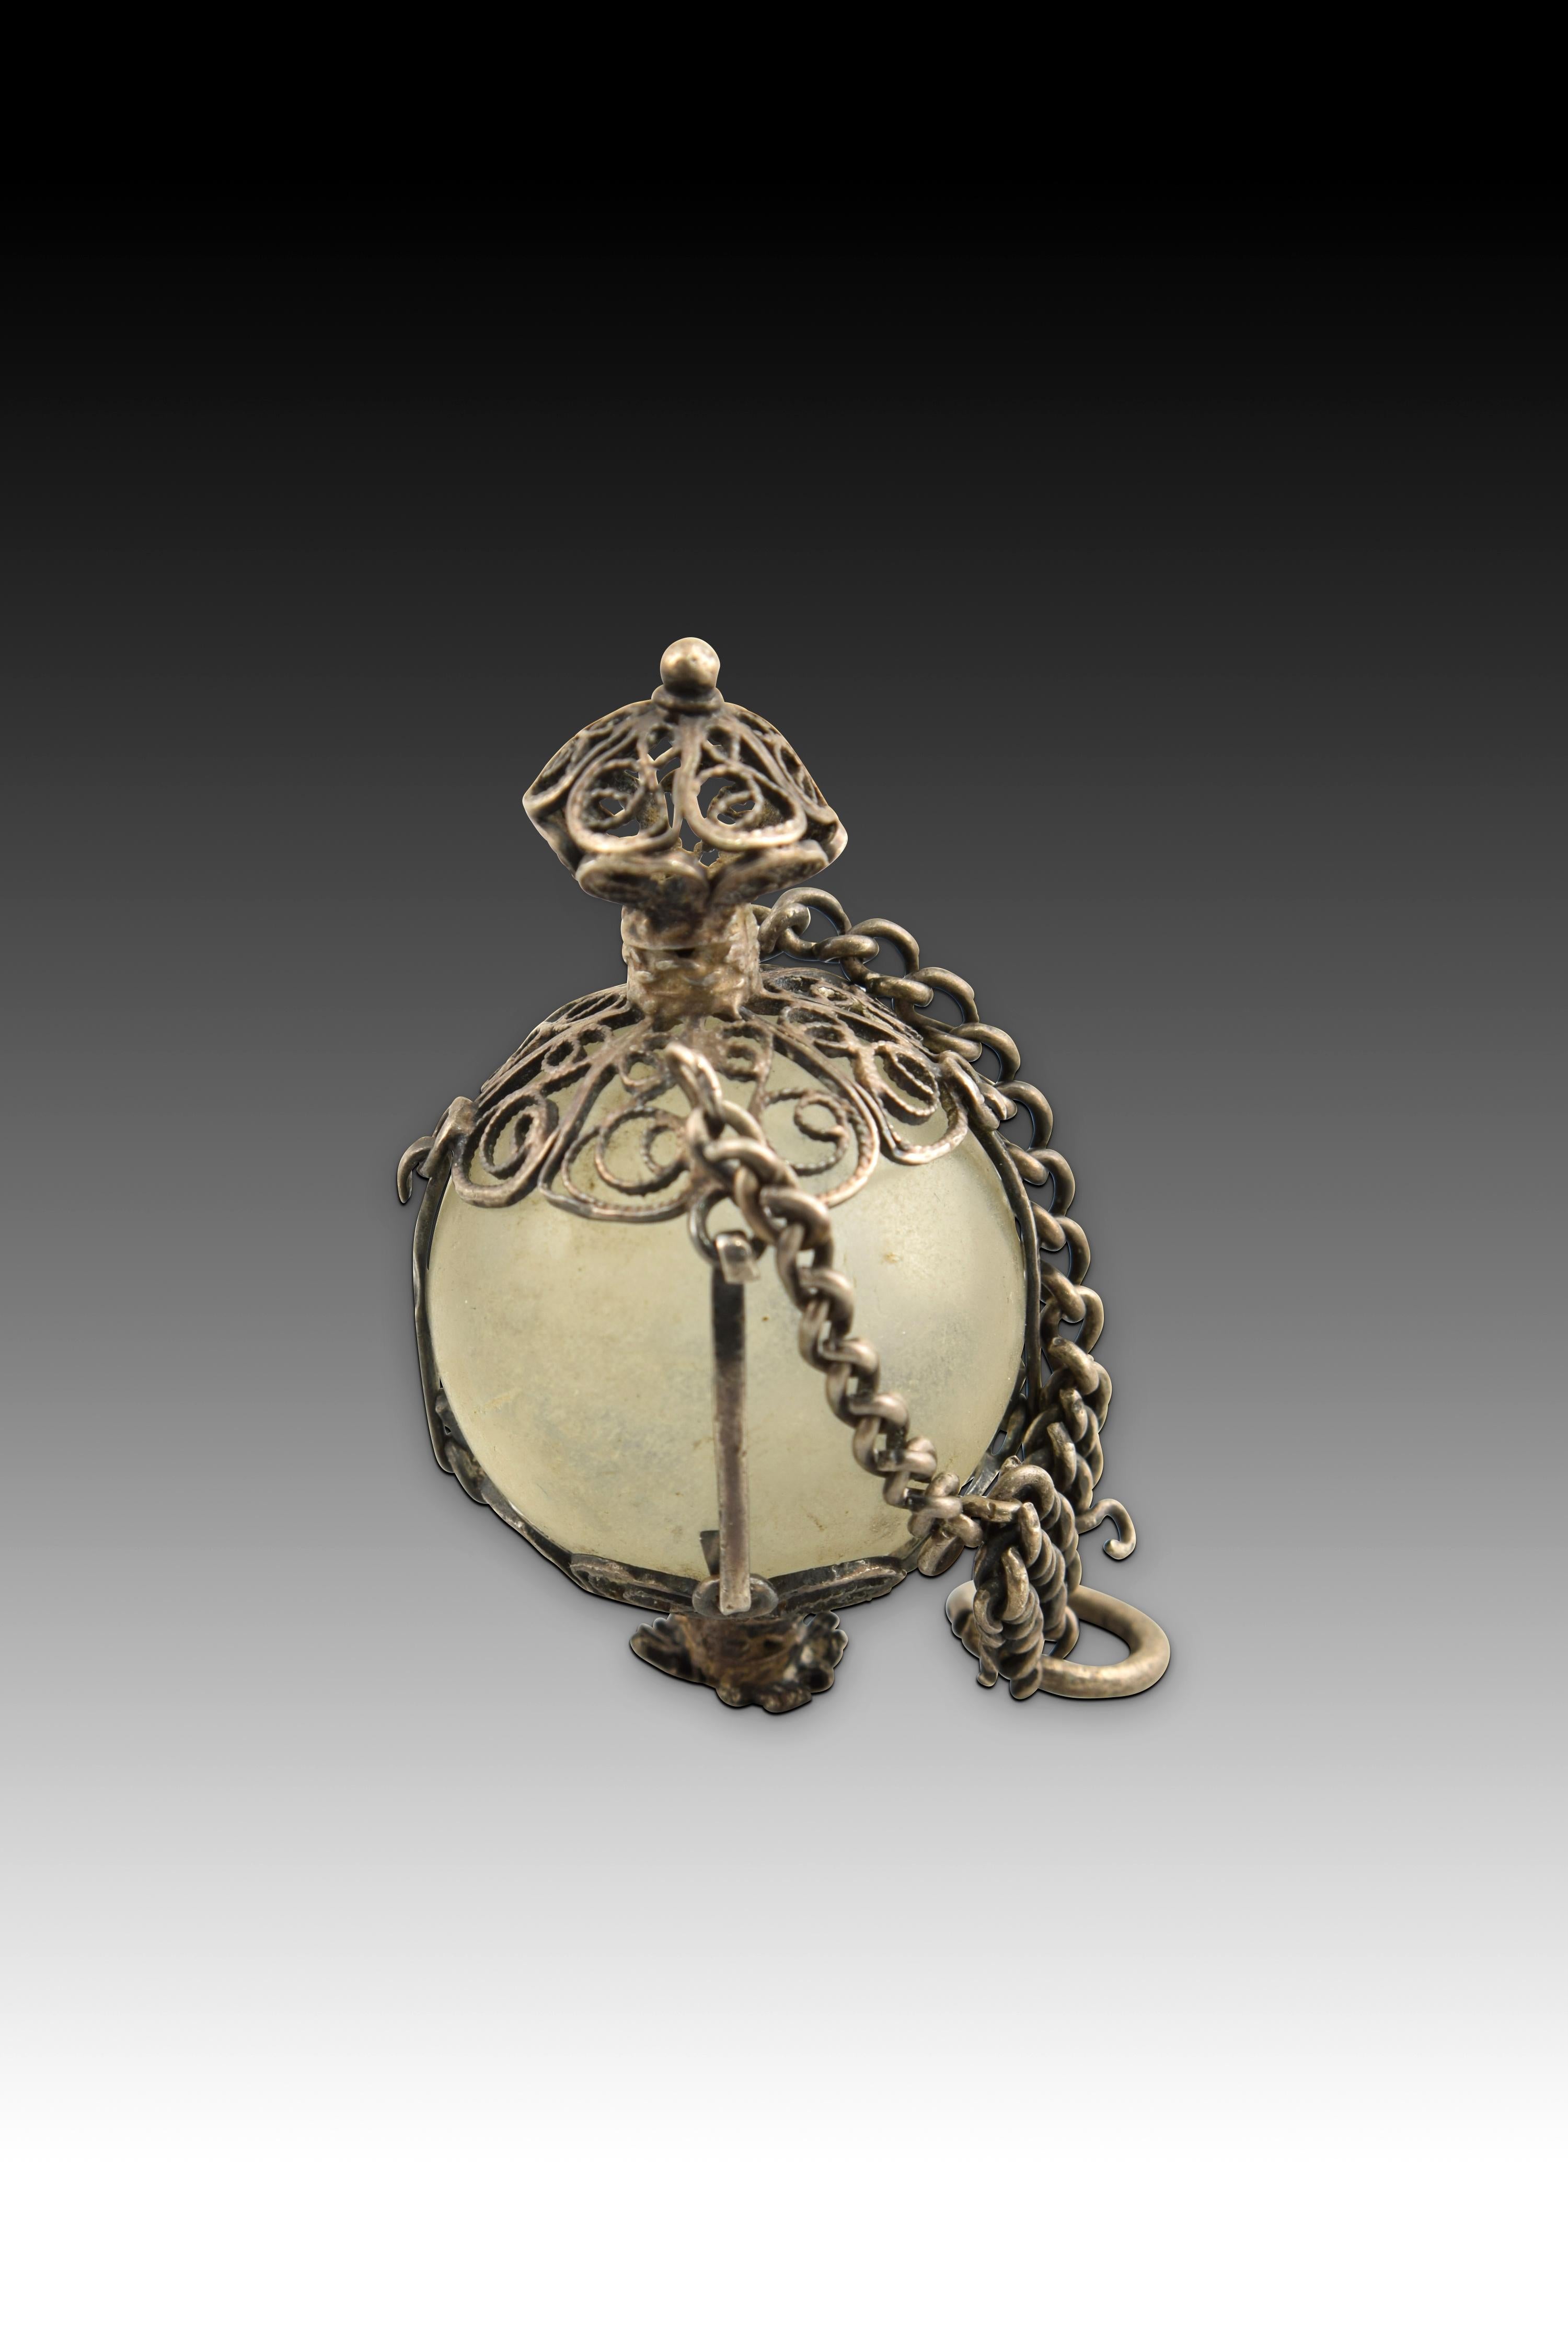 Neoclassical Revival Silver and Glass Pendant, 18th Century